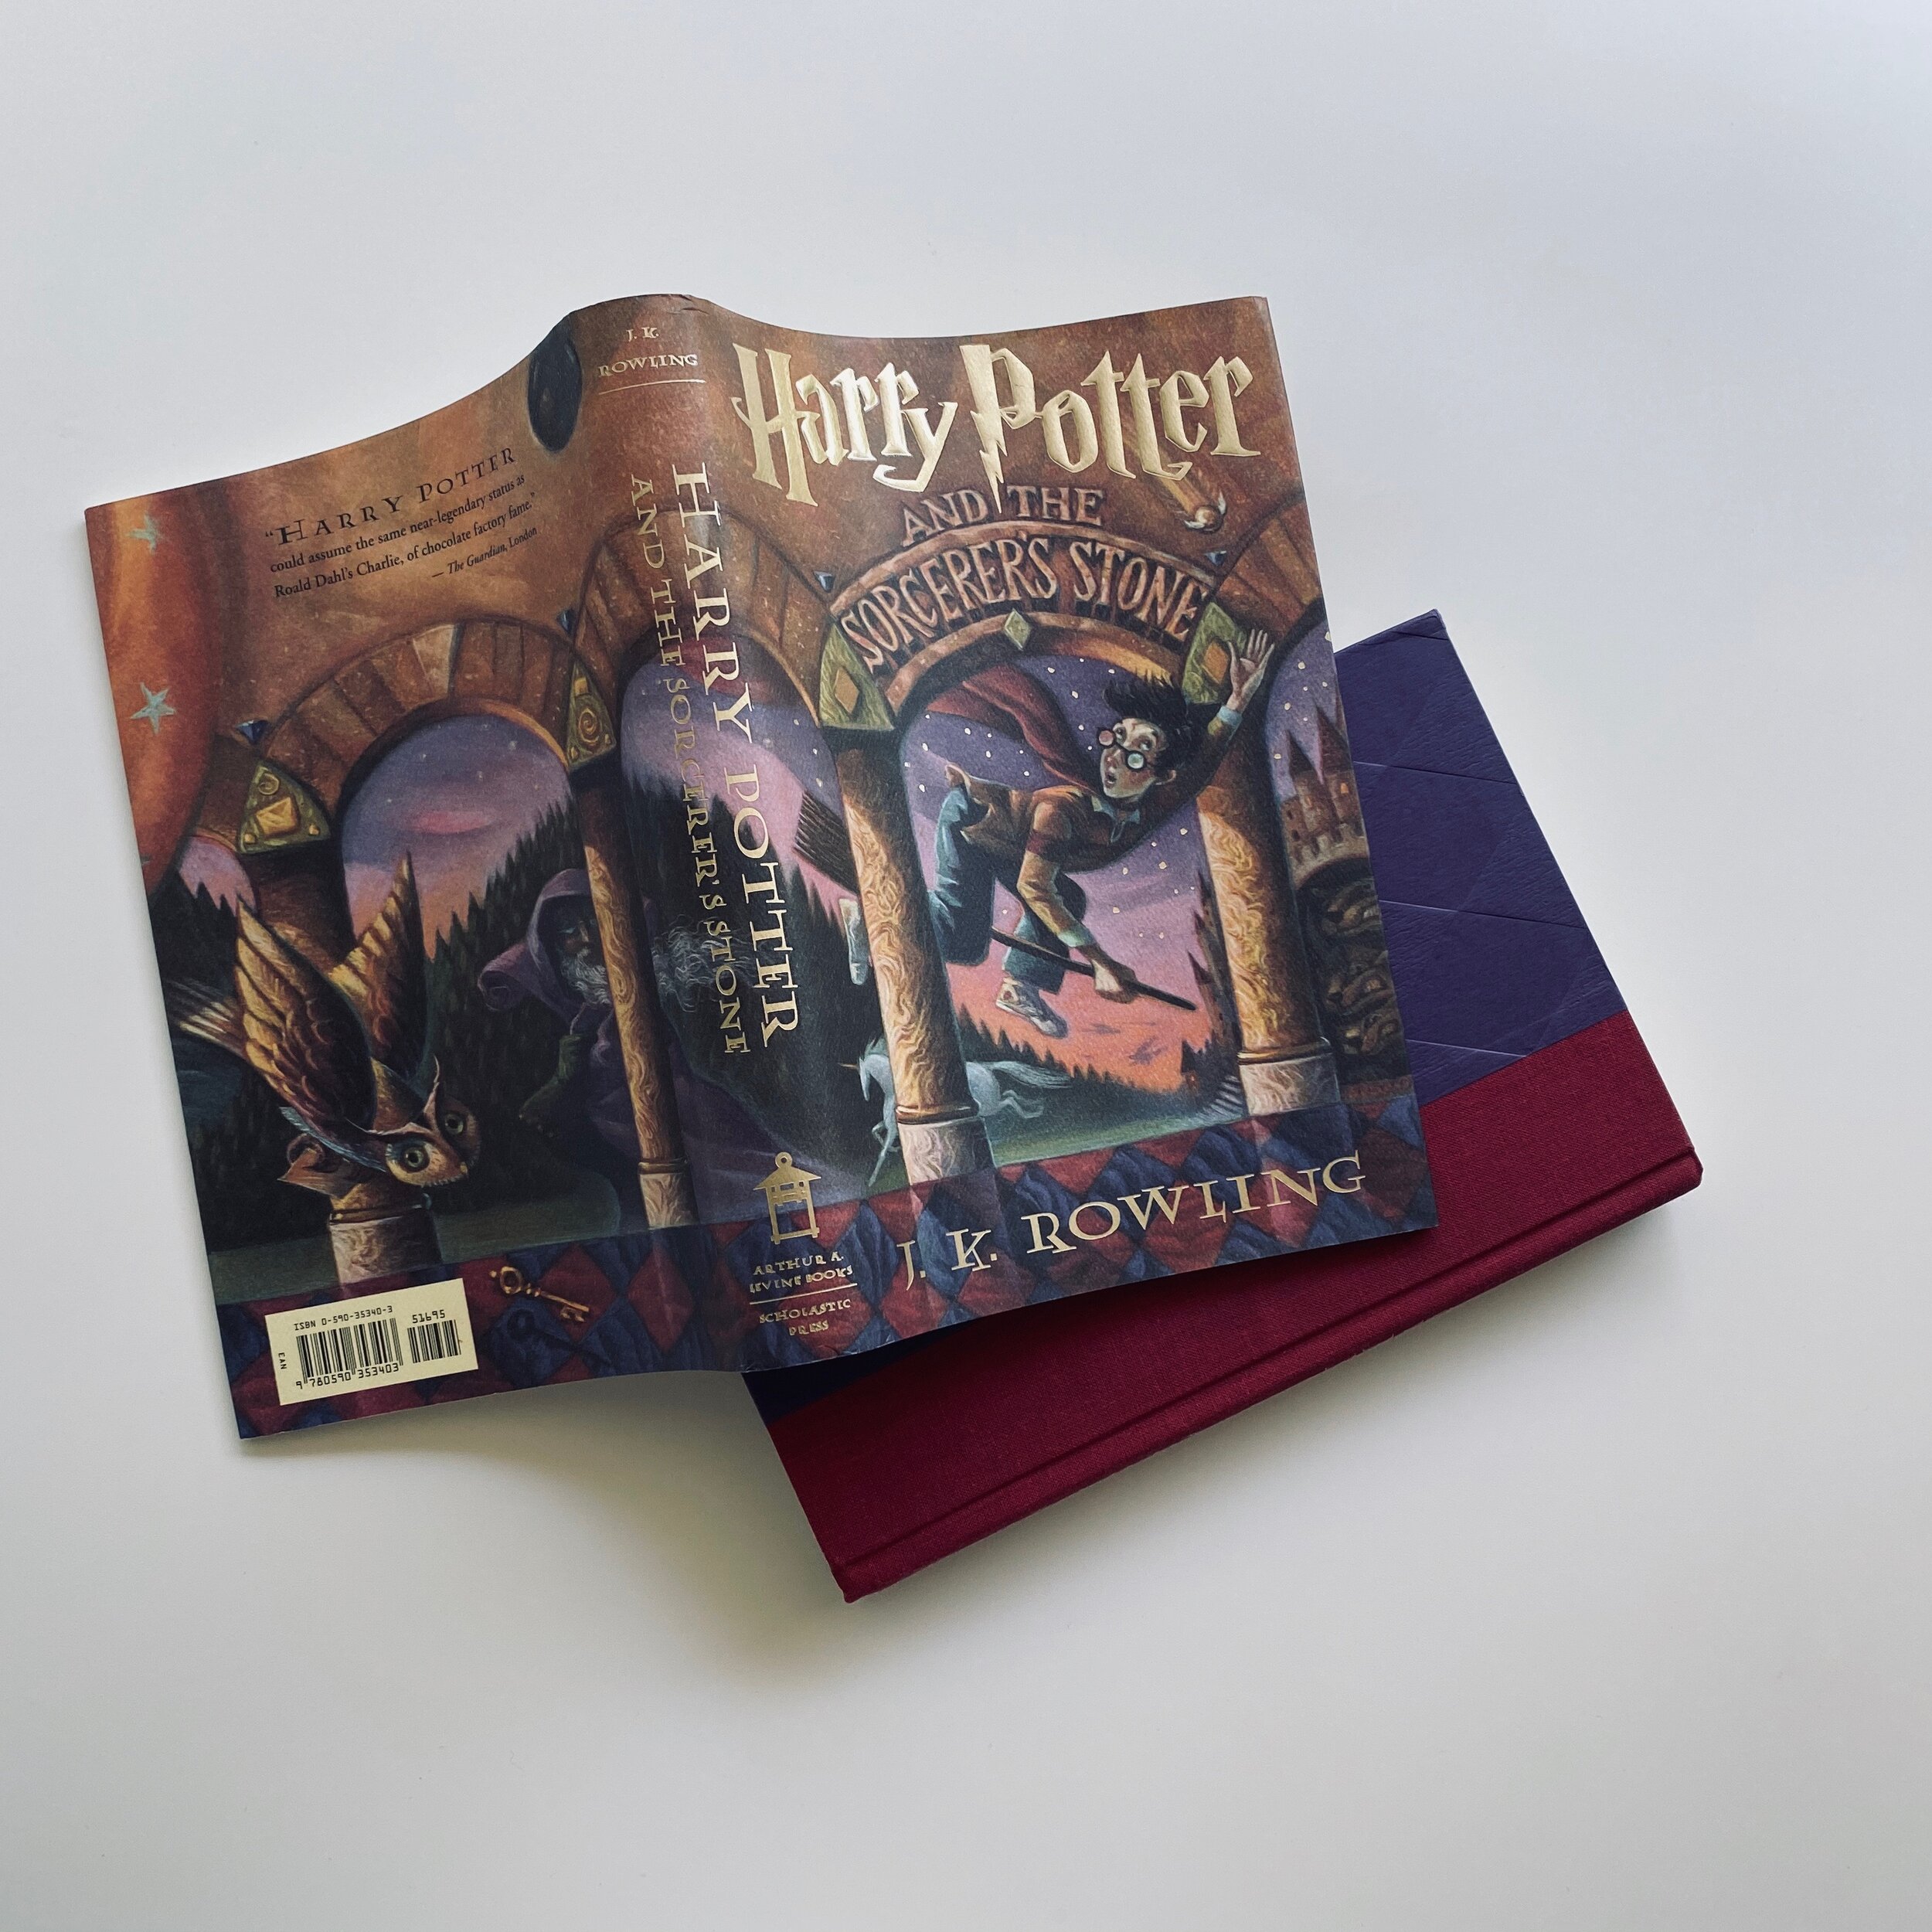 How to identify first editions or a first printing of Harry Potter